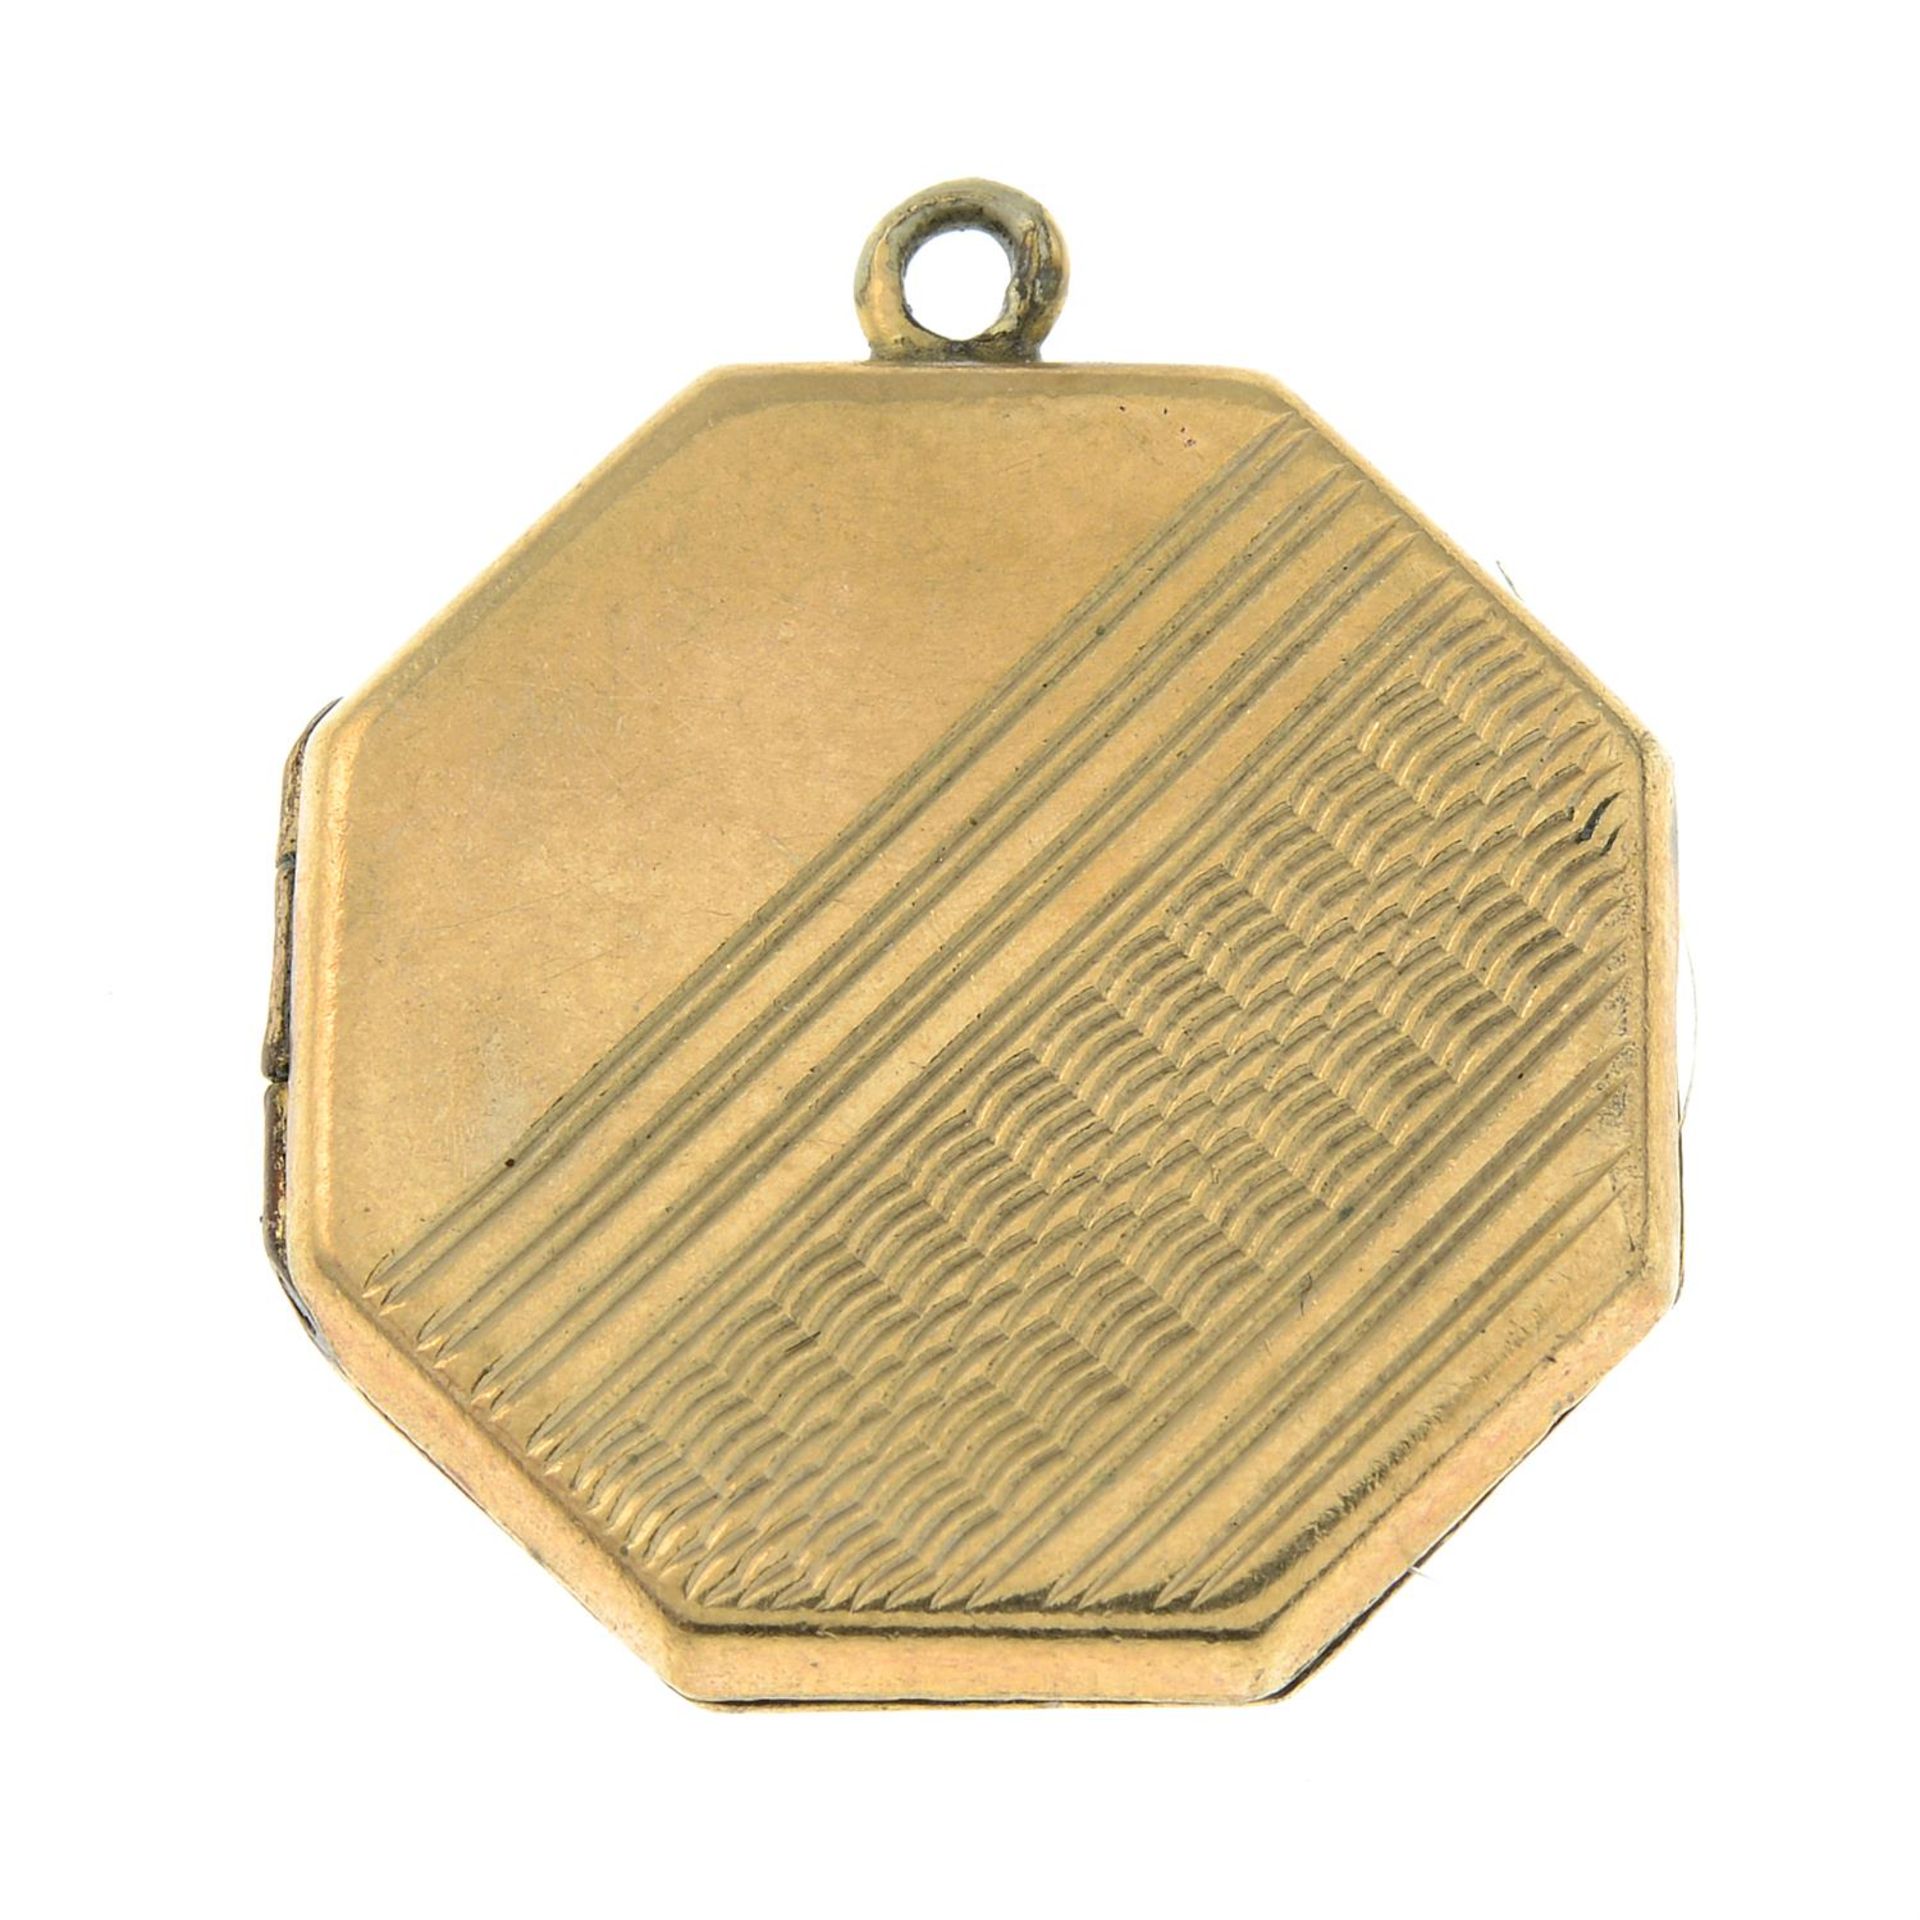 An engraved octagonal-shaped locket, with a 9ct gold chain necklace.